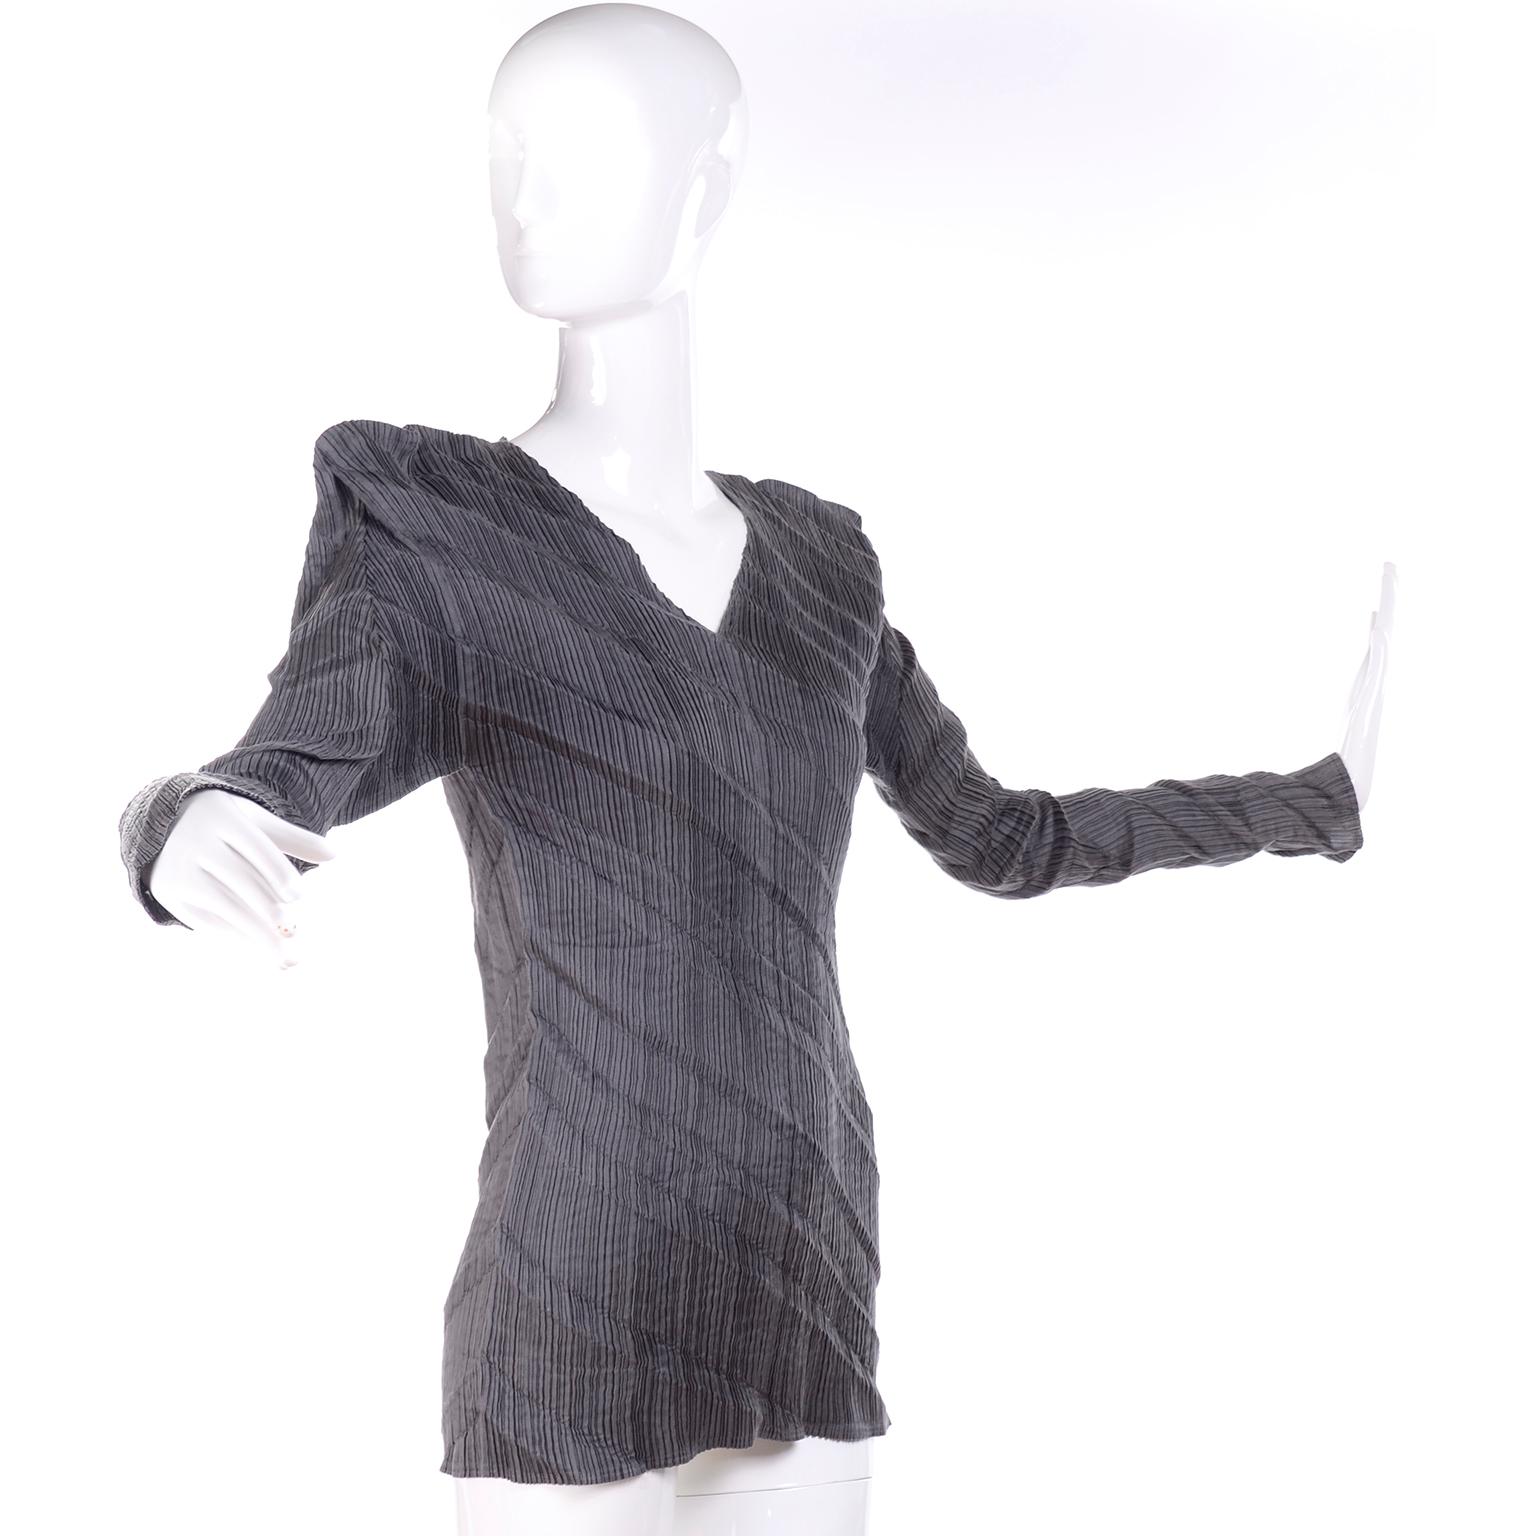 This is a fabulous Issey Miyake pleated top with avant garde asymmetrical shoulders in medium charcoal gray.  The top is pleated on the diagonal and is labeled a size Medium. This is one of many things we acquired when we purchased the estate of a